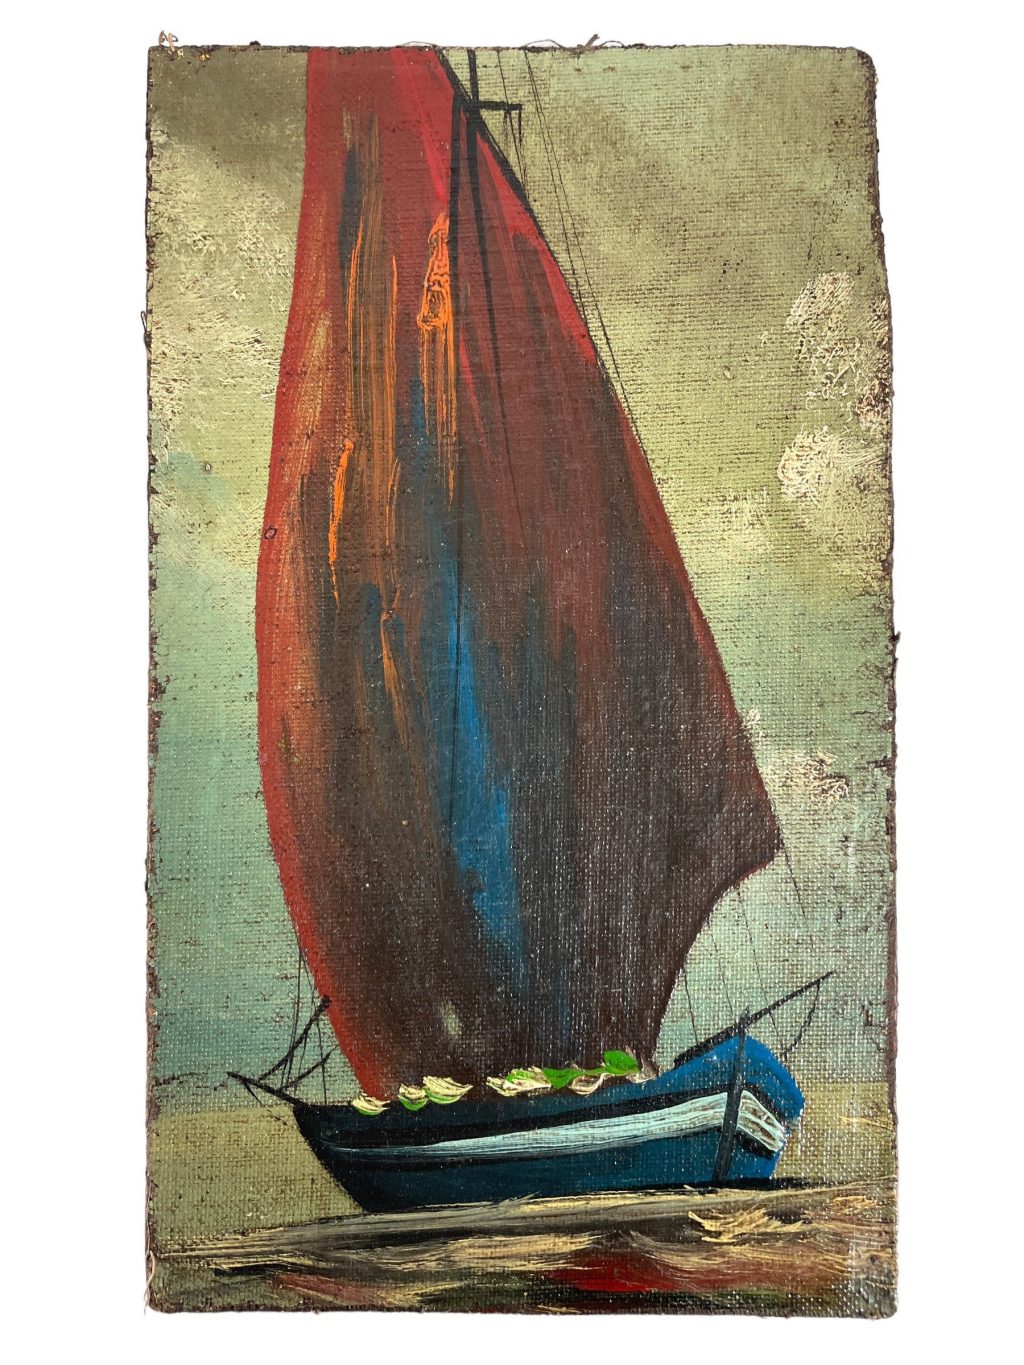 Antique French Sailing Boat “Slower Days” Oil Painting On Wood Board Wall Decor Decoration c1910’s